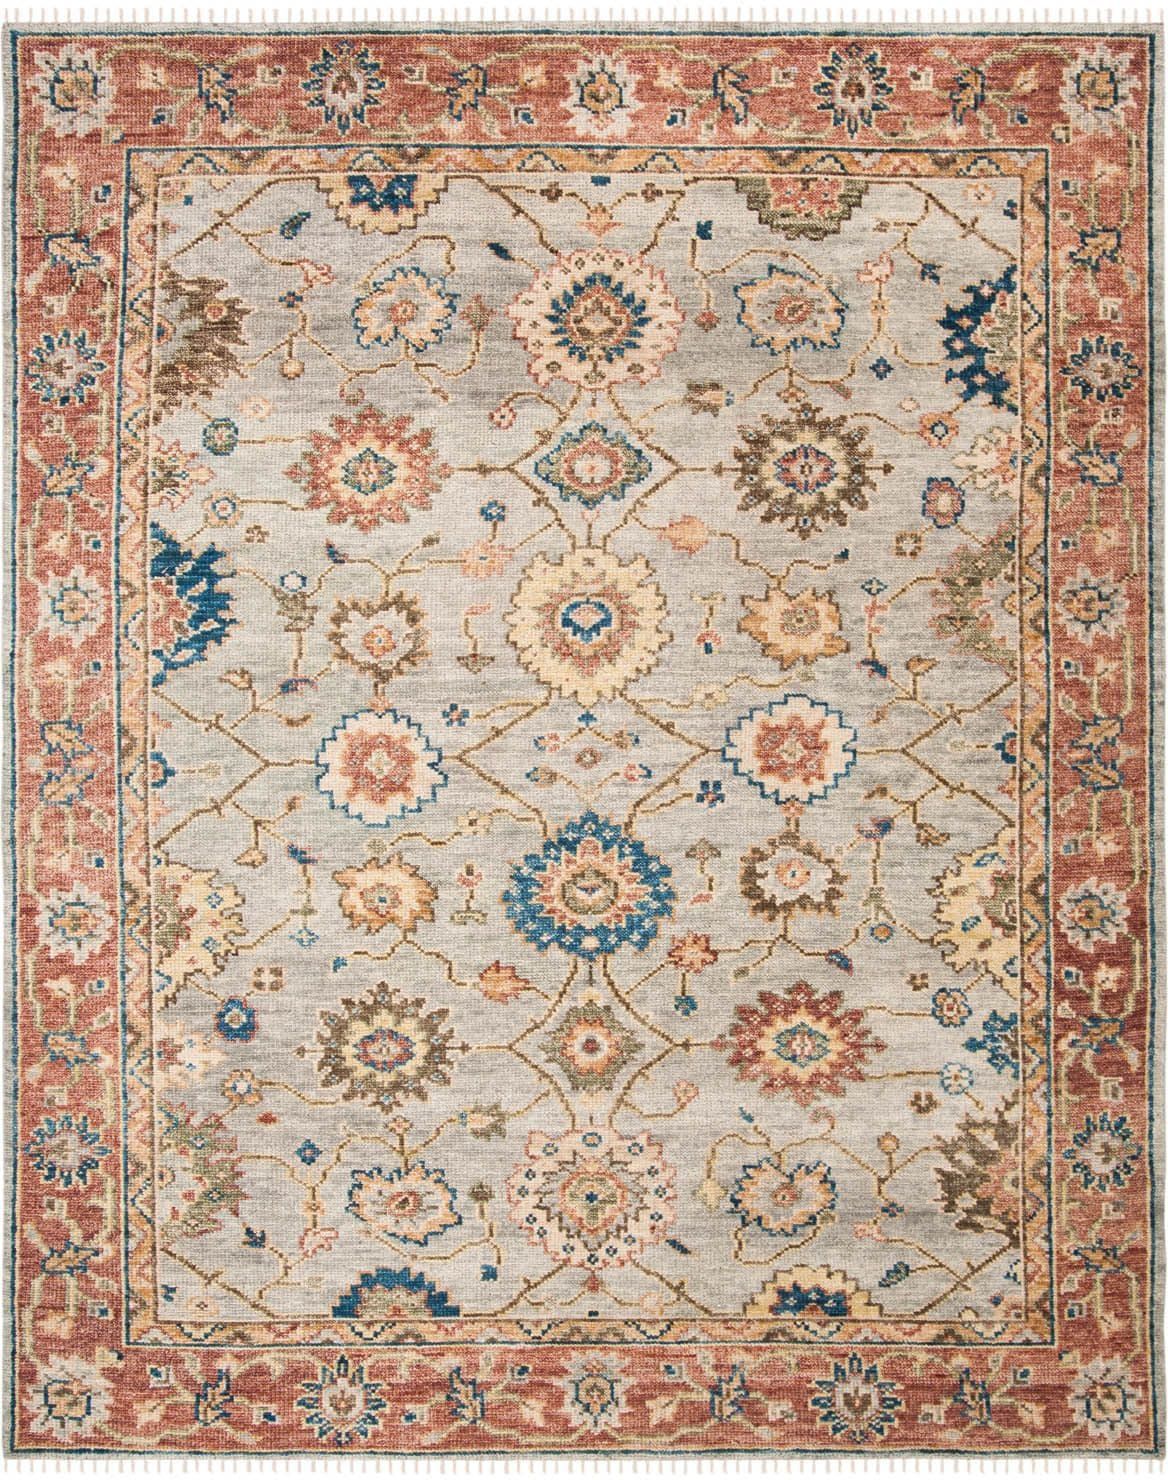 Safavieh Samarkand Collection SRK110F Hand-Knotted Traditional Wool Area Rug 9' x 12' Grey/Ivory